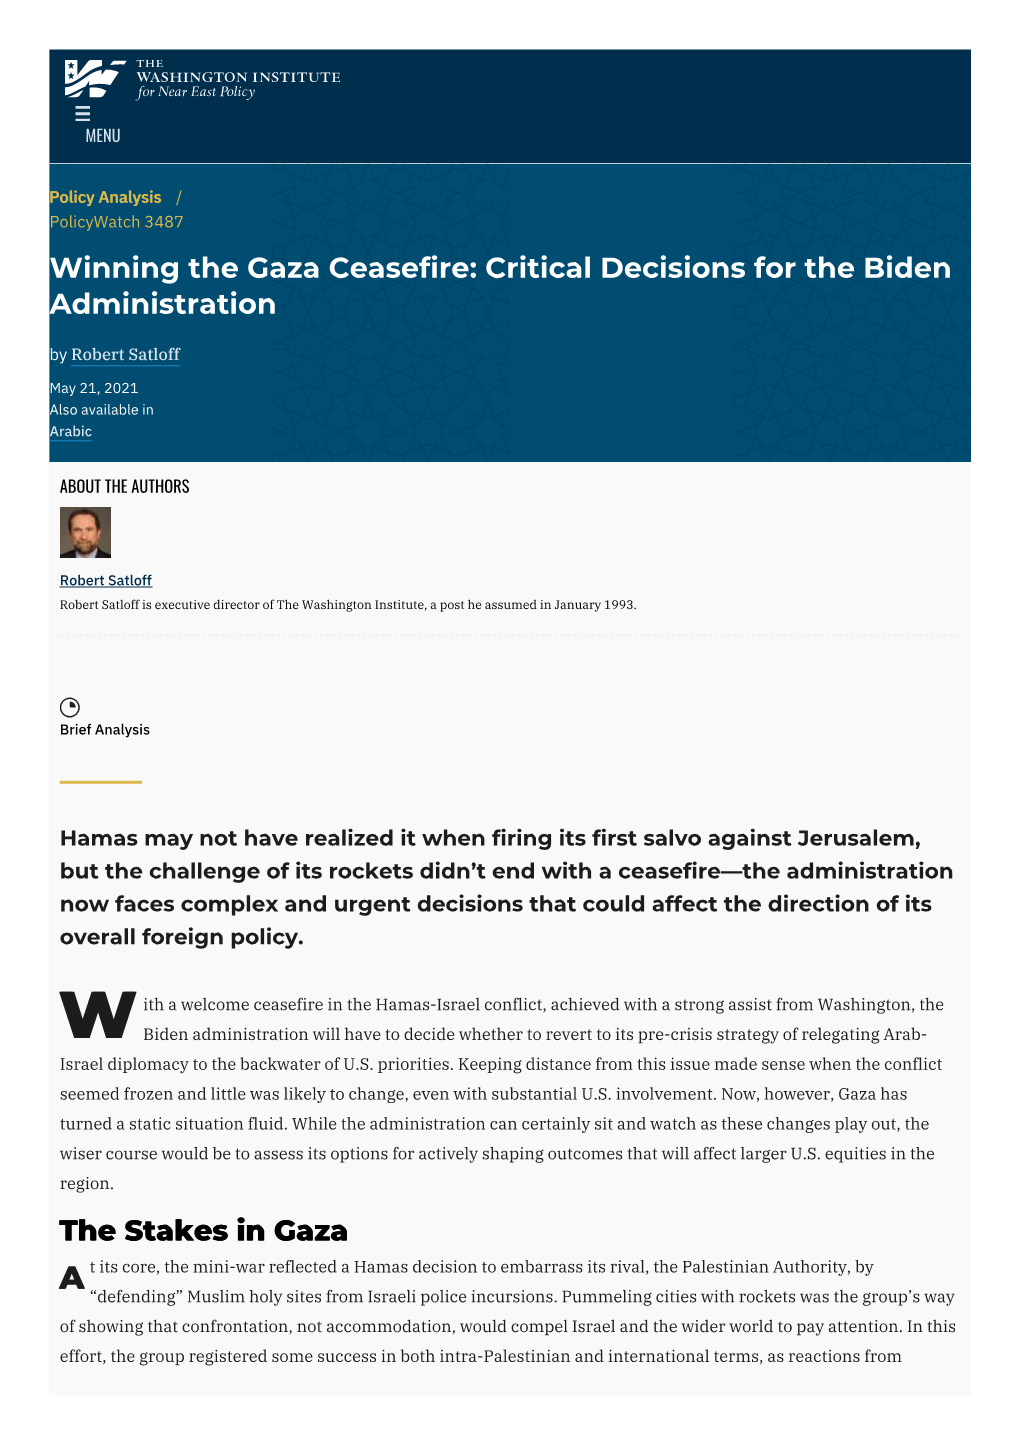 Winning the Gaza Ceasefire: Critical Decisions for the Biden Administration by Robert Satloff